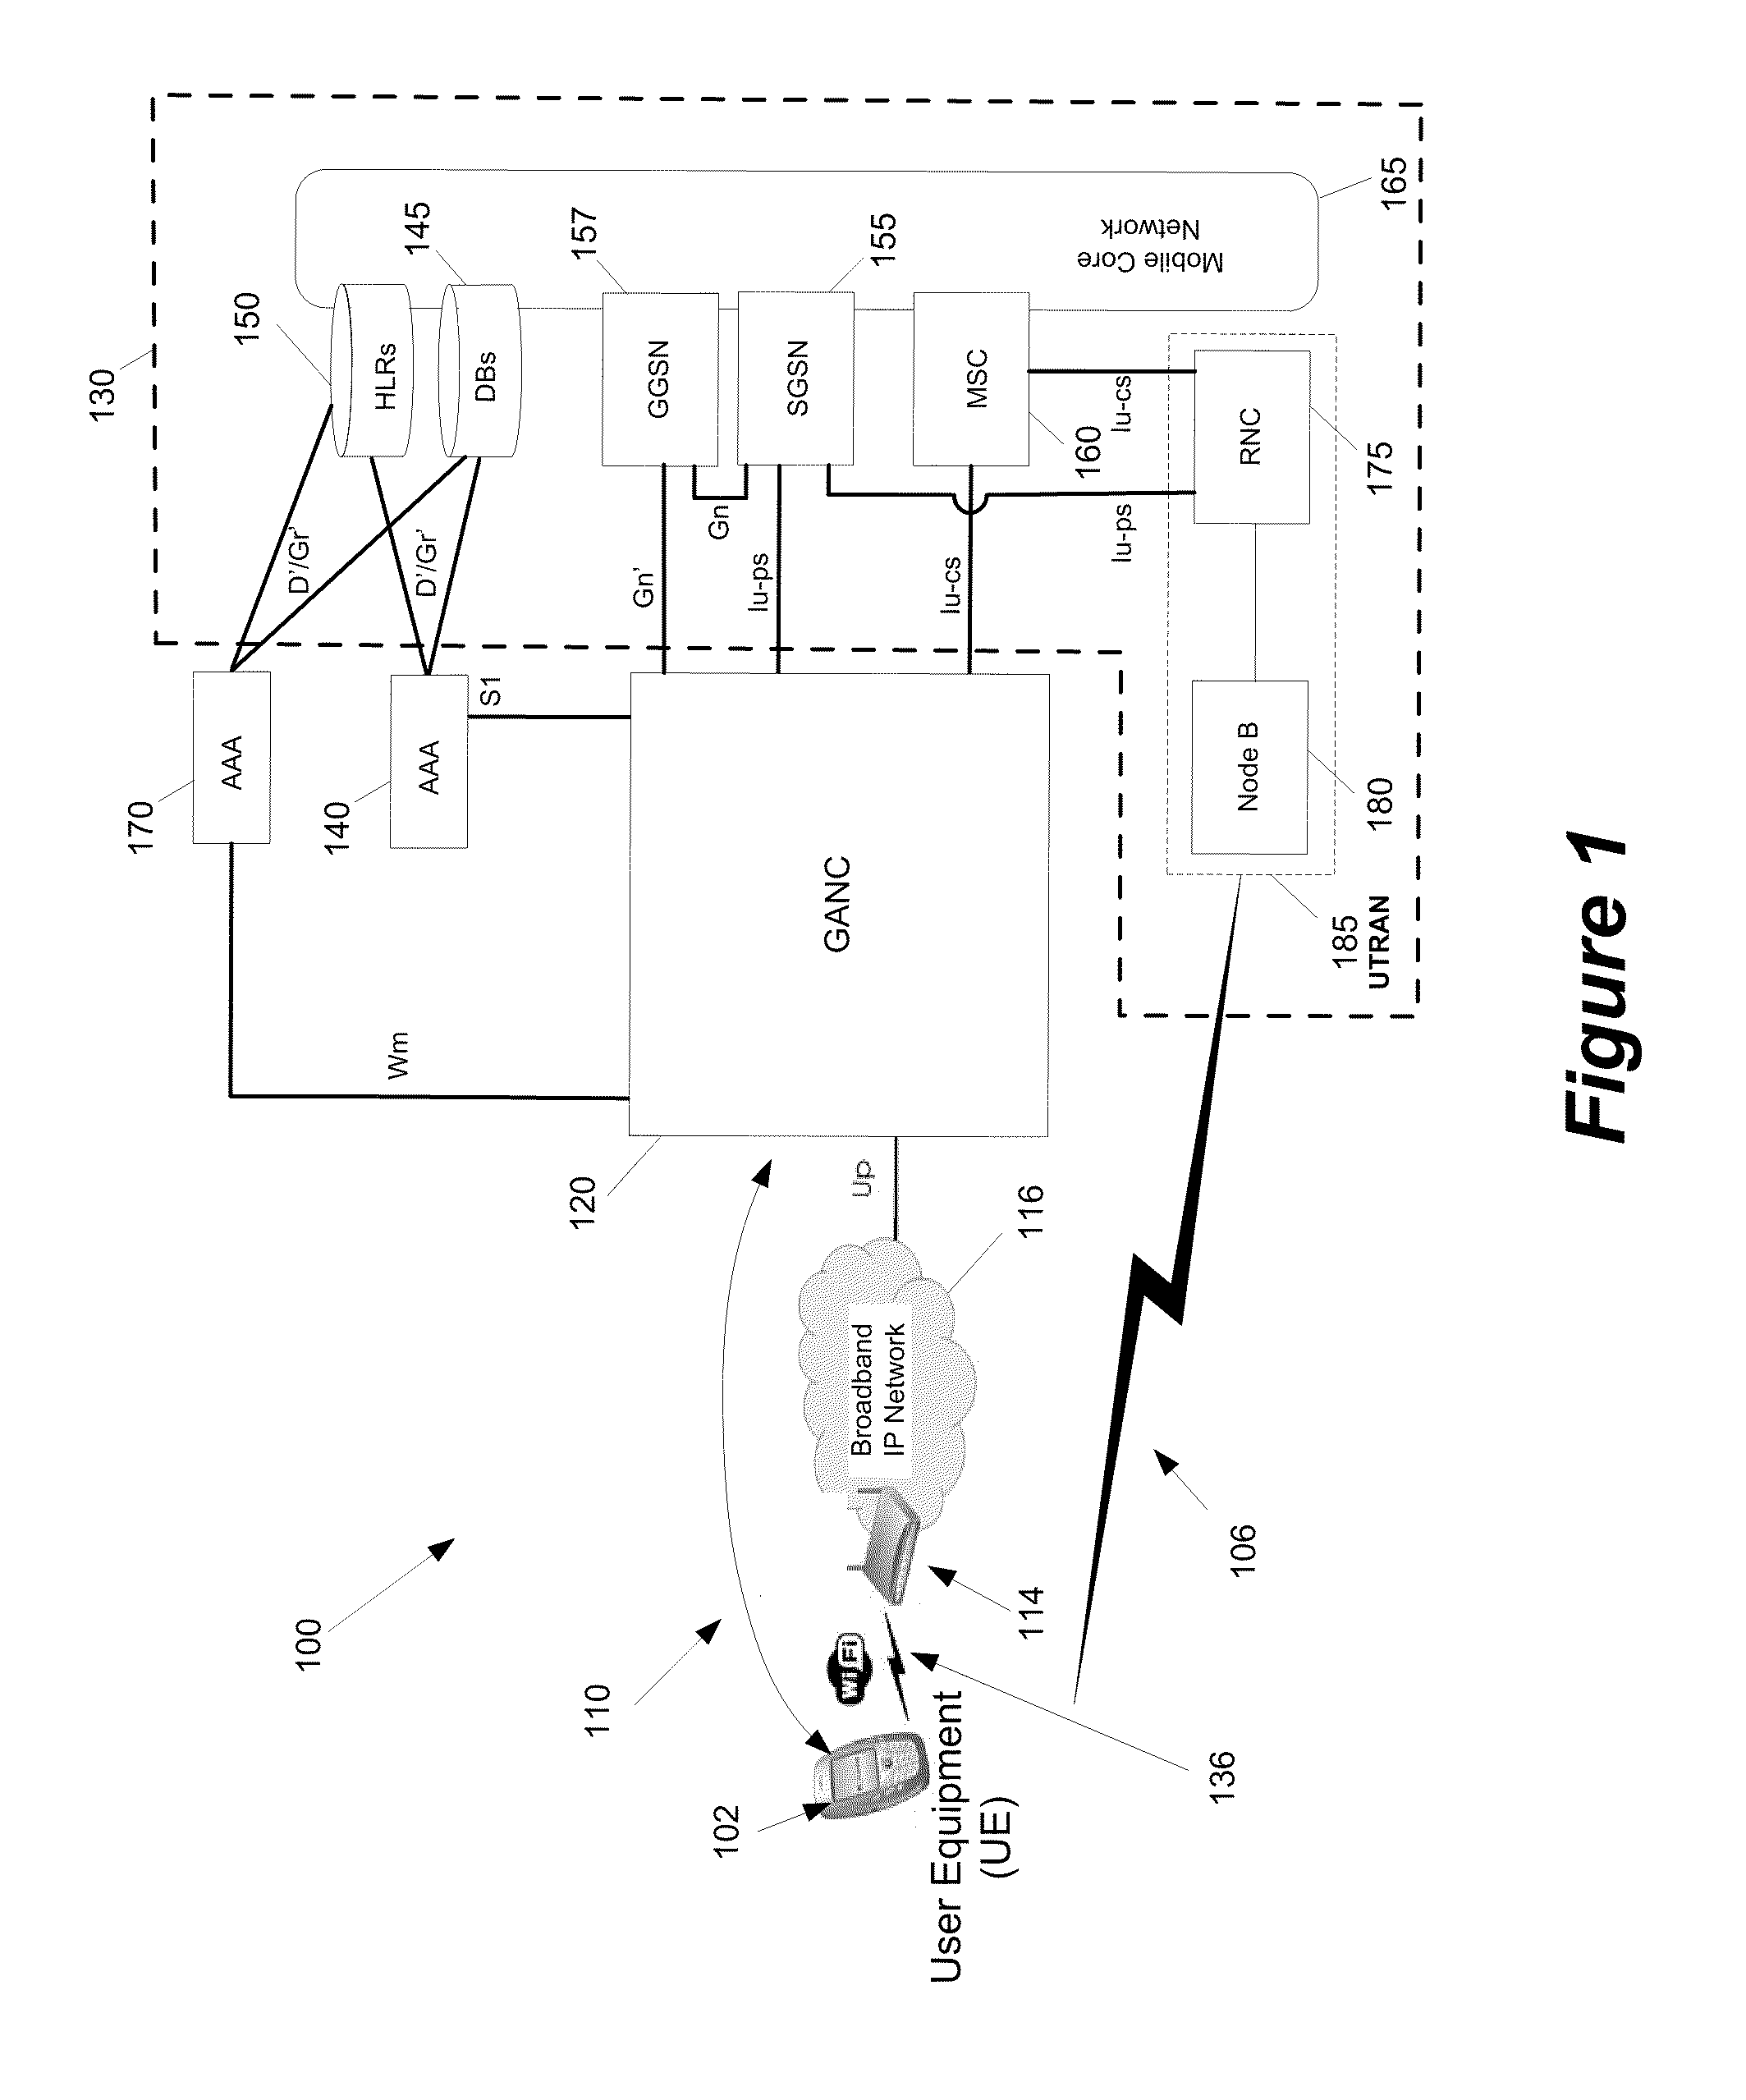 System and method for dual mode communication